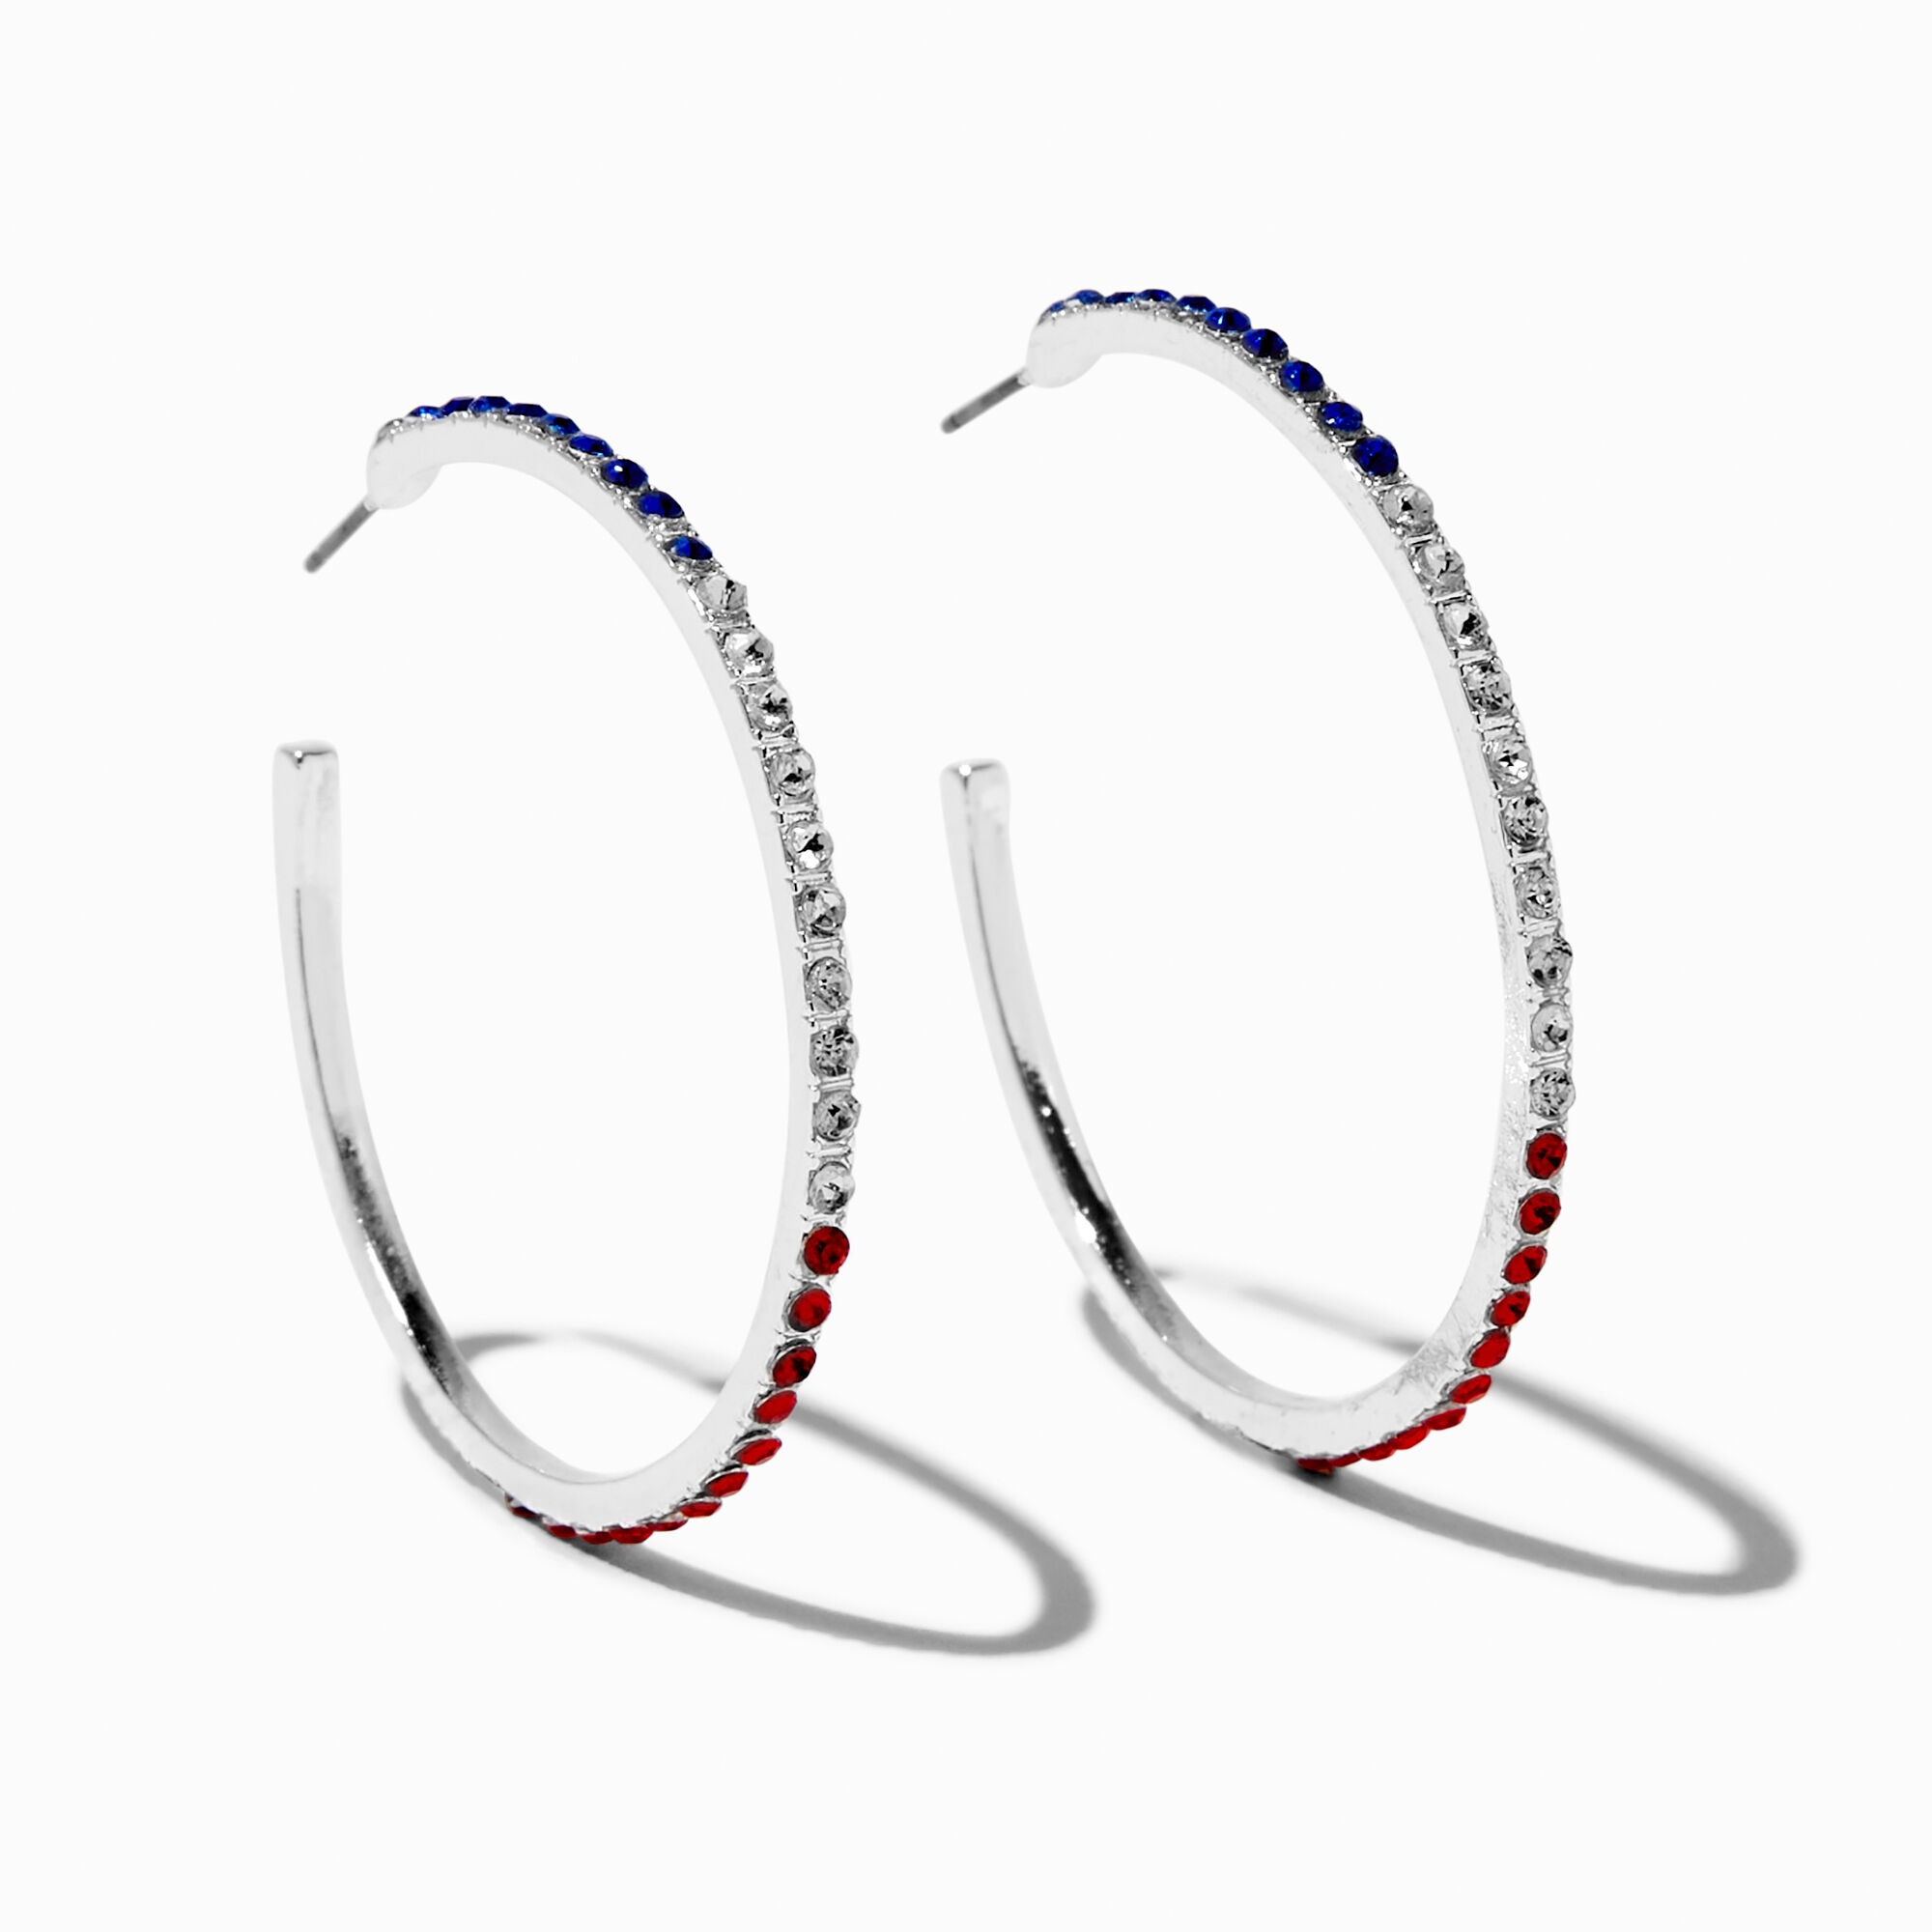 View Claires Red White Gemstone Hoop Earrings Blue information